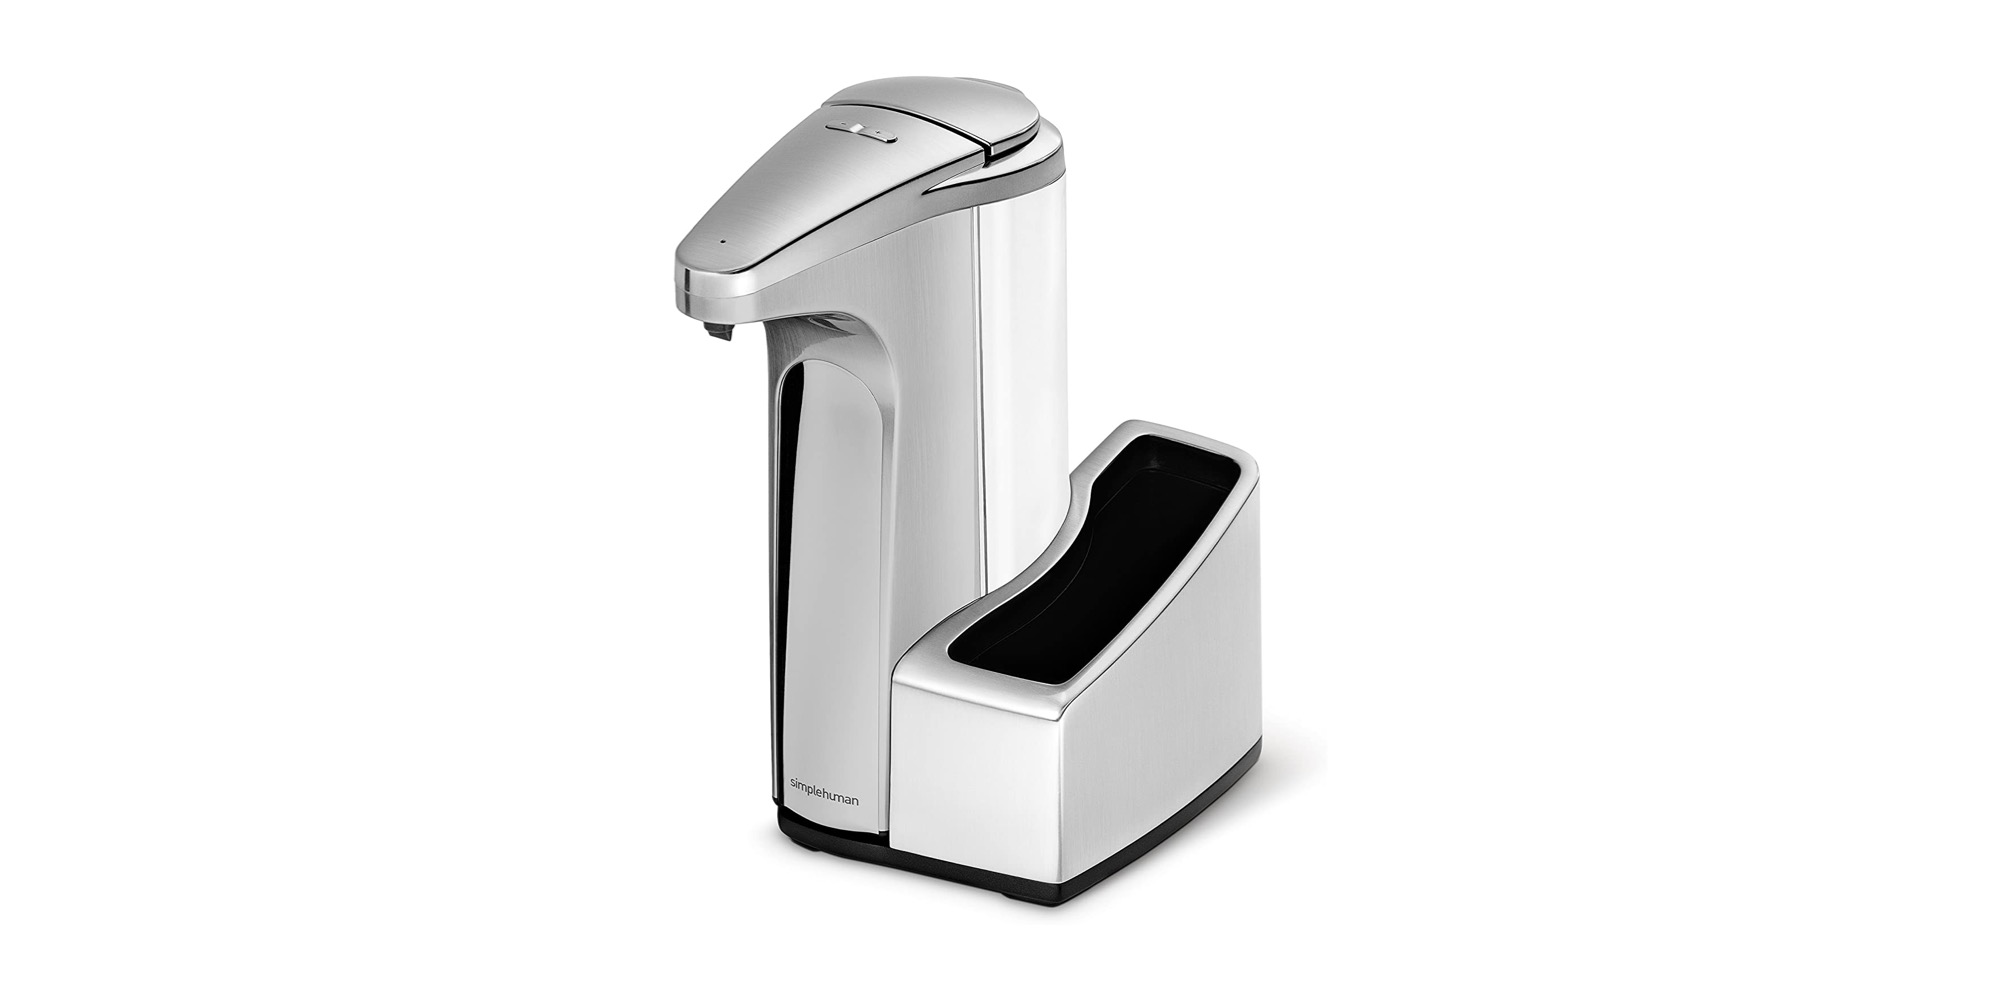 https://9to5toys.com/wp-content/uploads/sites/5/2020/08/simplehuman-13-ounce-Touch-Free-Automatic-Soap-Pump.jpg